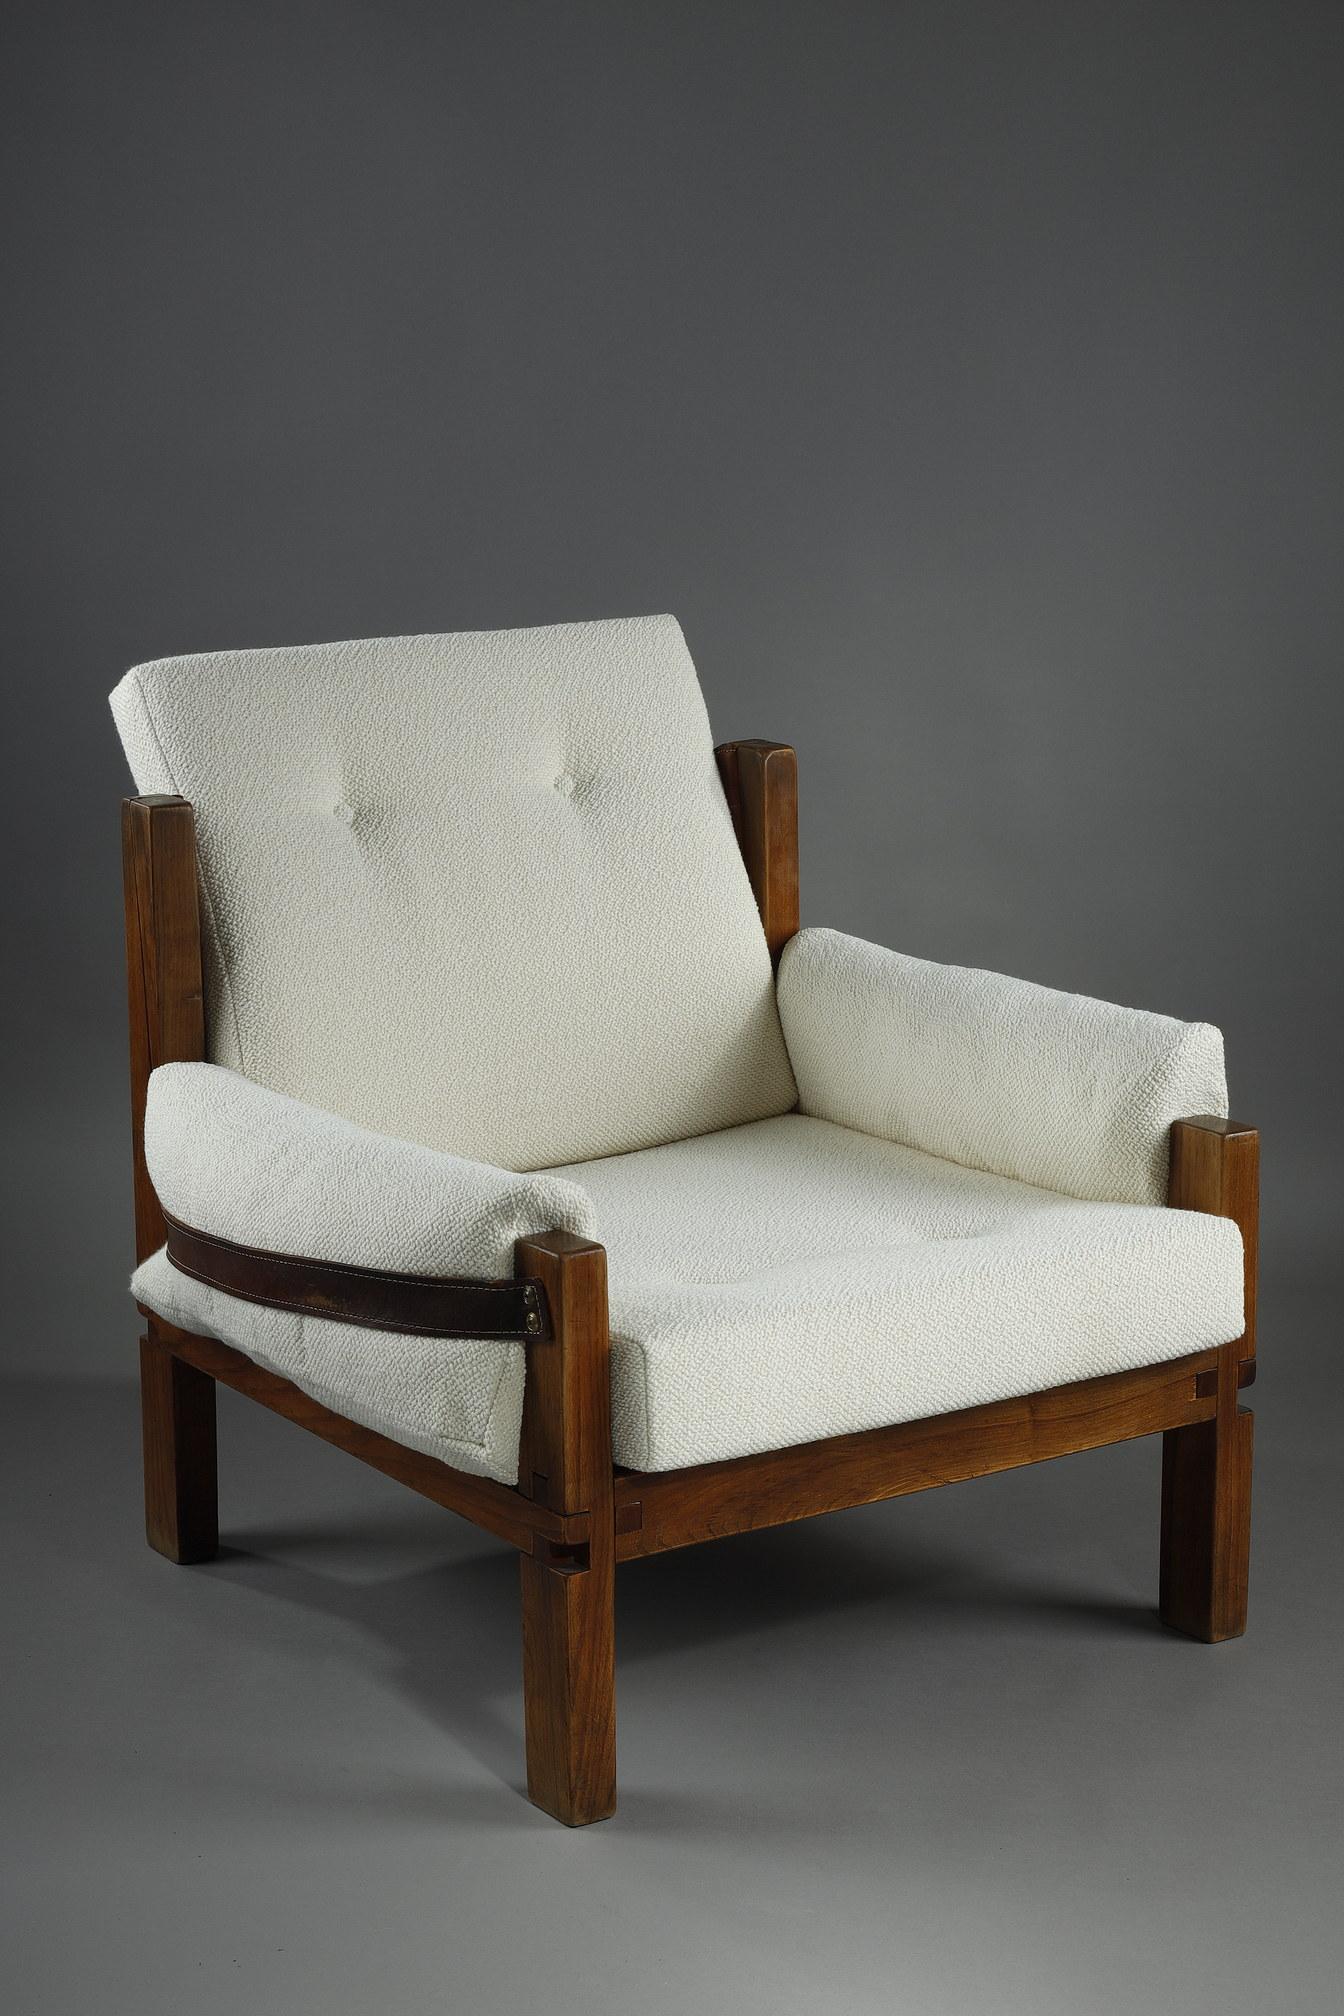 S15 armchair by Pierre Chapo in solid wood and white cream fabric (Lelièvre - Sherpas Craie). The elm structure is made by interlocking and assembling pieces, typical of Pierre Chapo style. 

The 